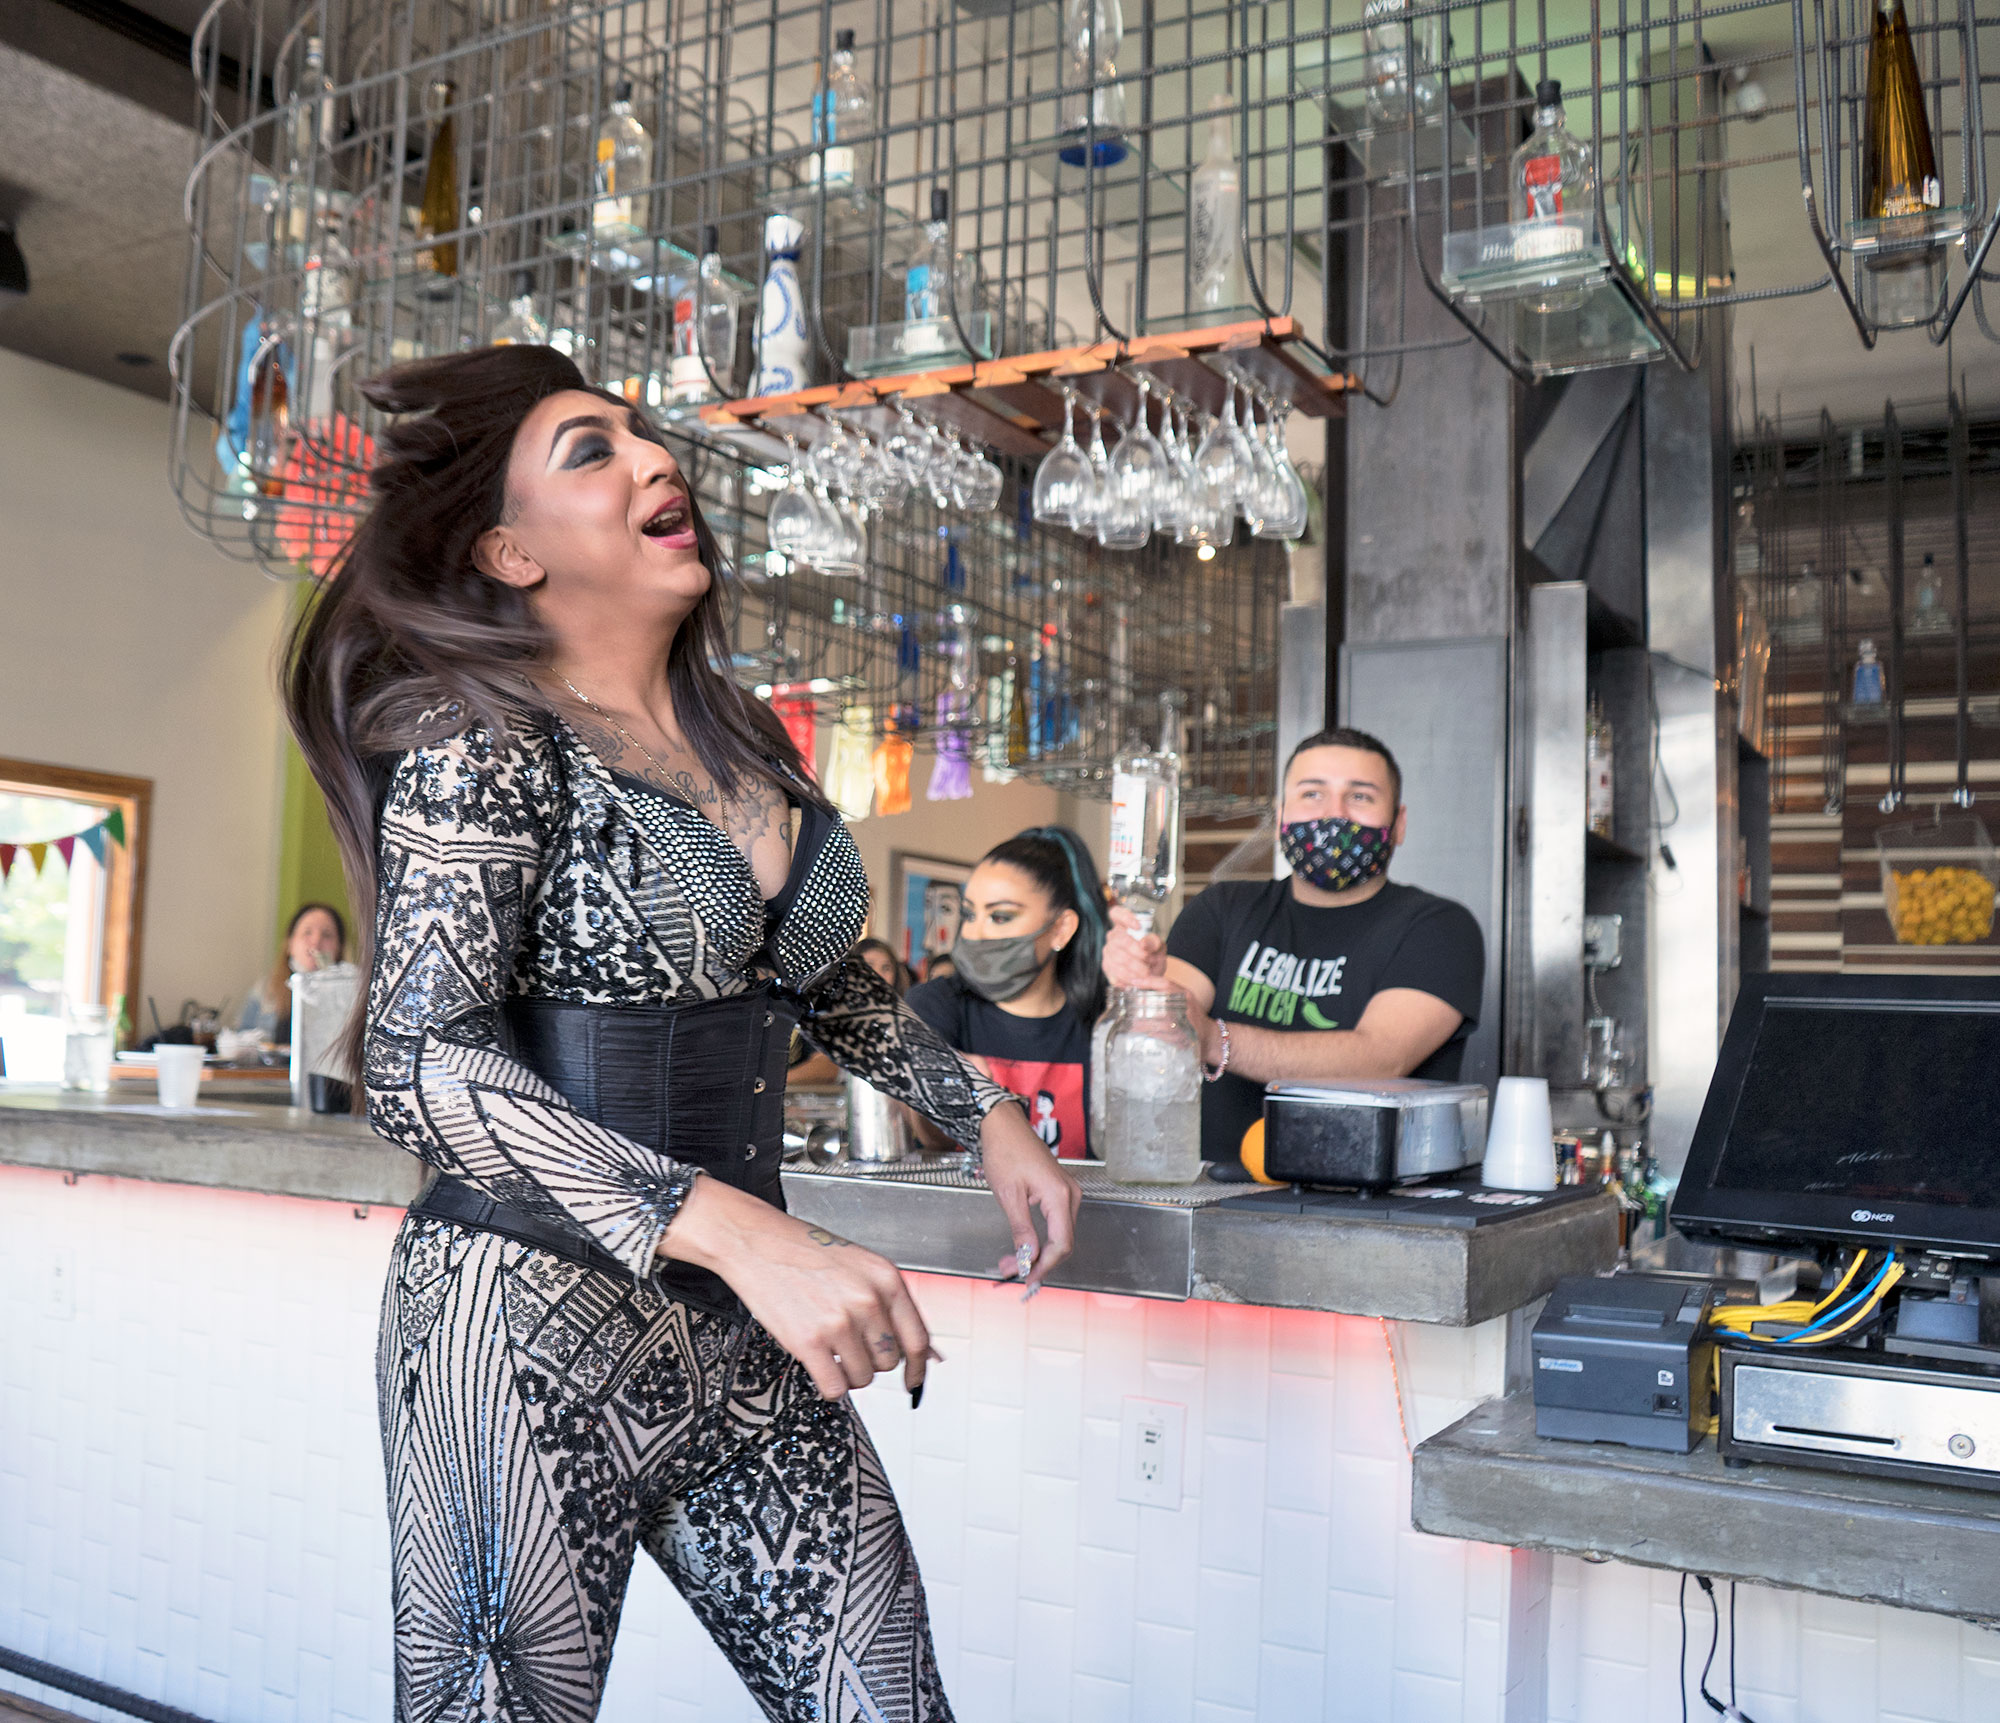 Mayra D'Lorenzo performing at TNT Tacos and Tequila drag brunch in Uptown Dallas.